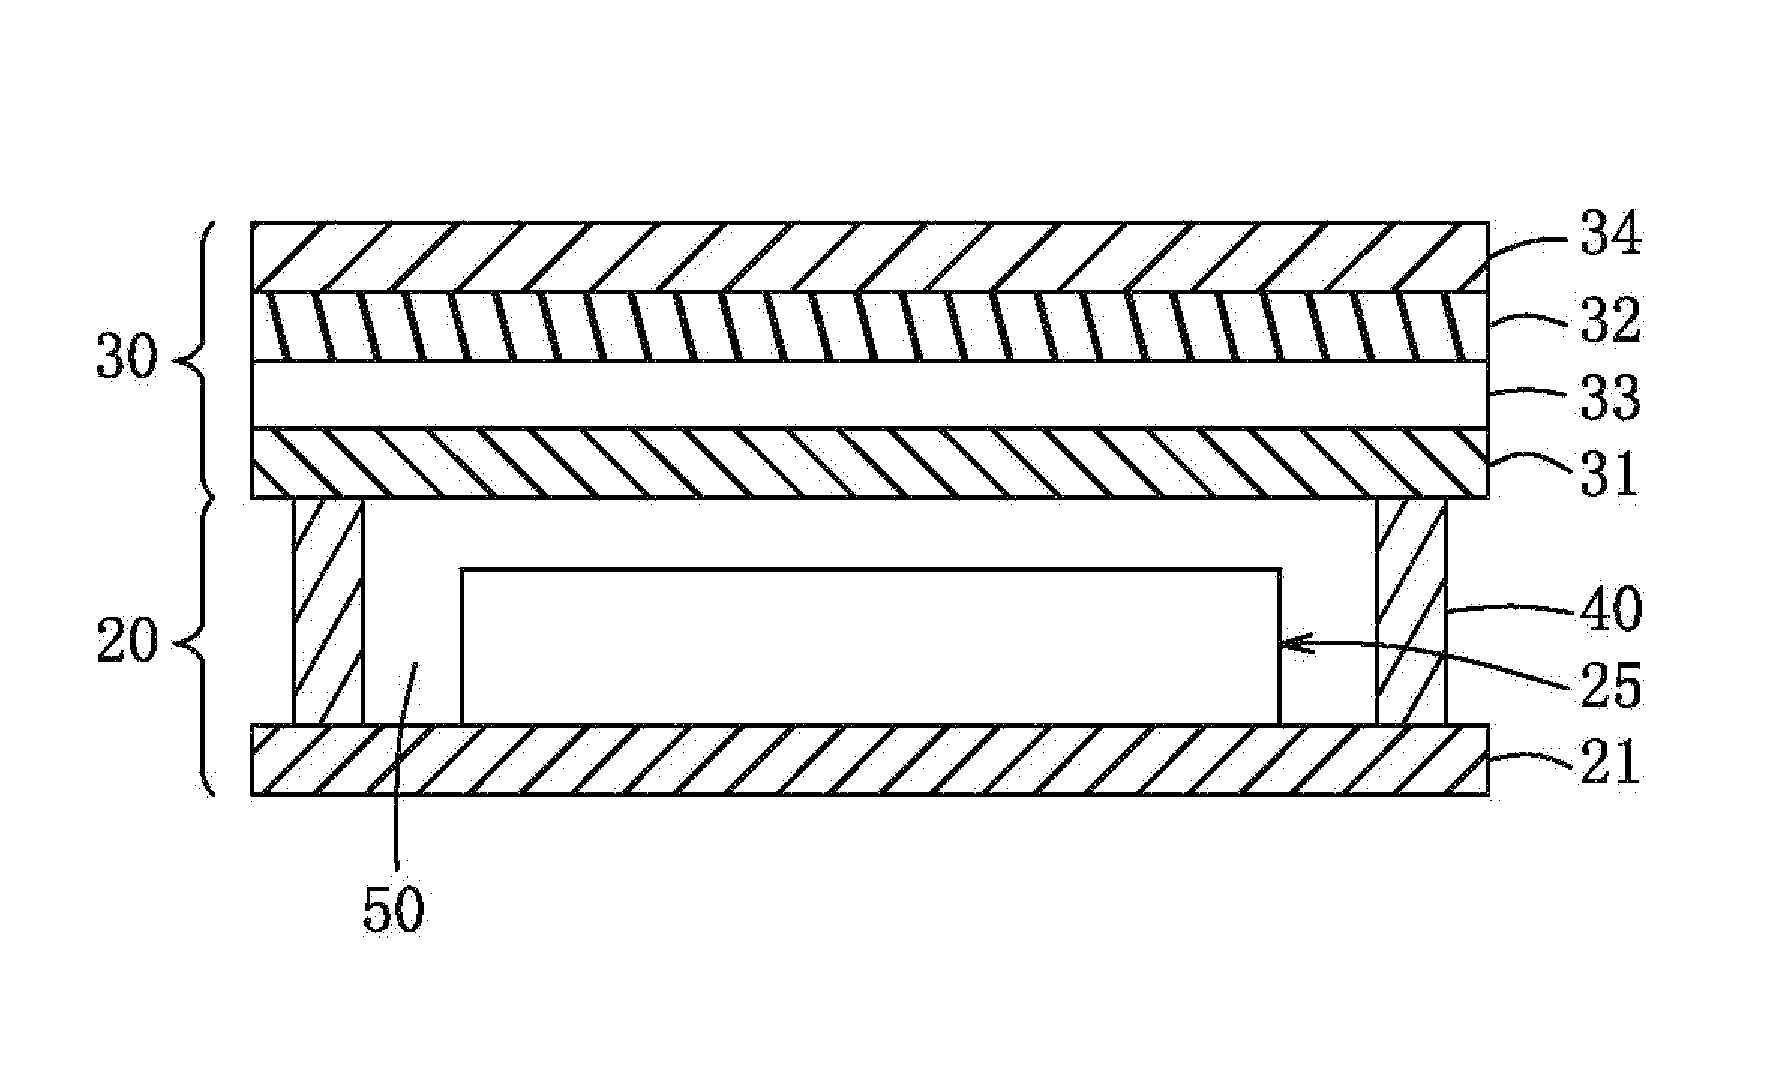 Organic light emitting diode (OLED) touch display device